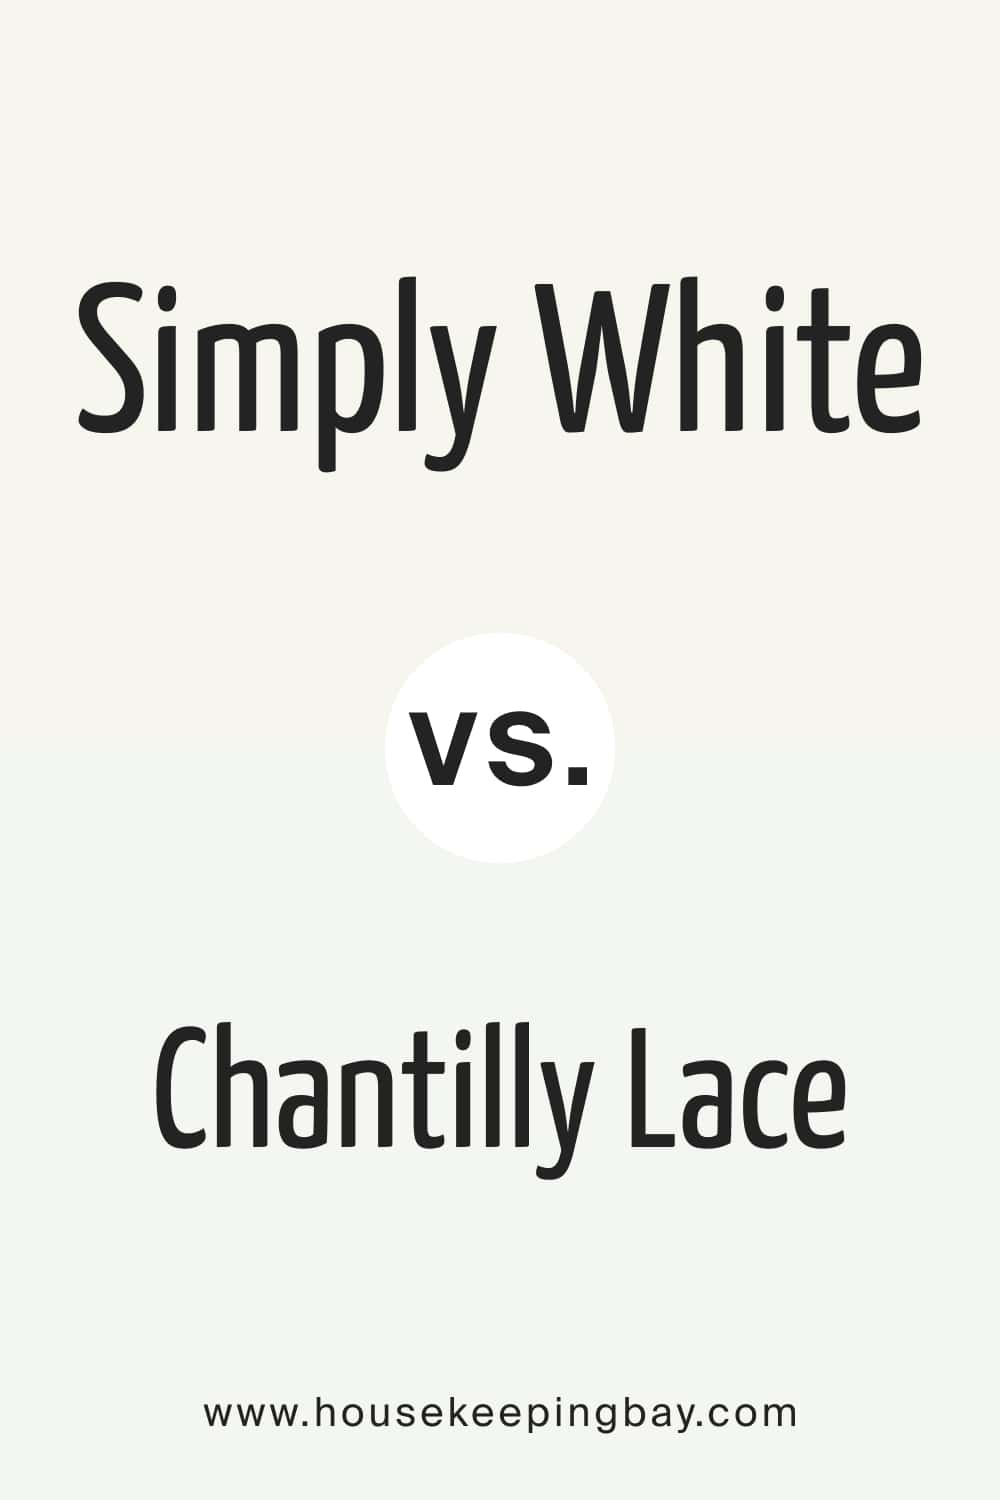 Simply White OC 117 vs. Chantilly Lace